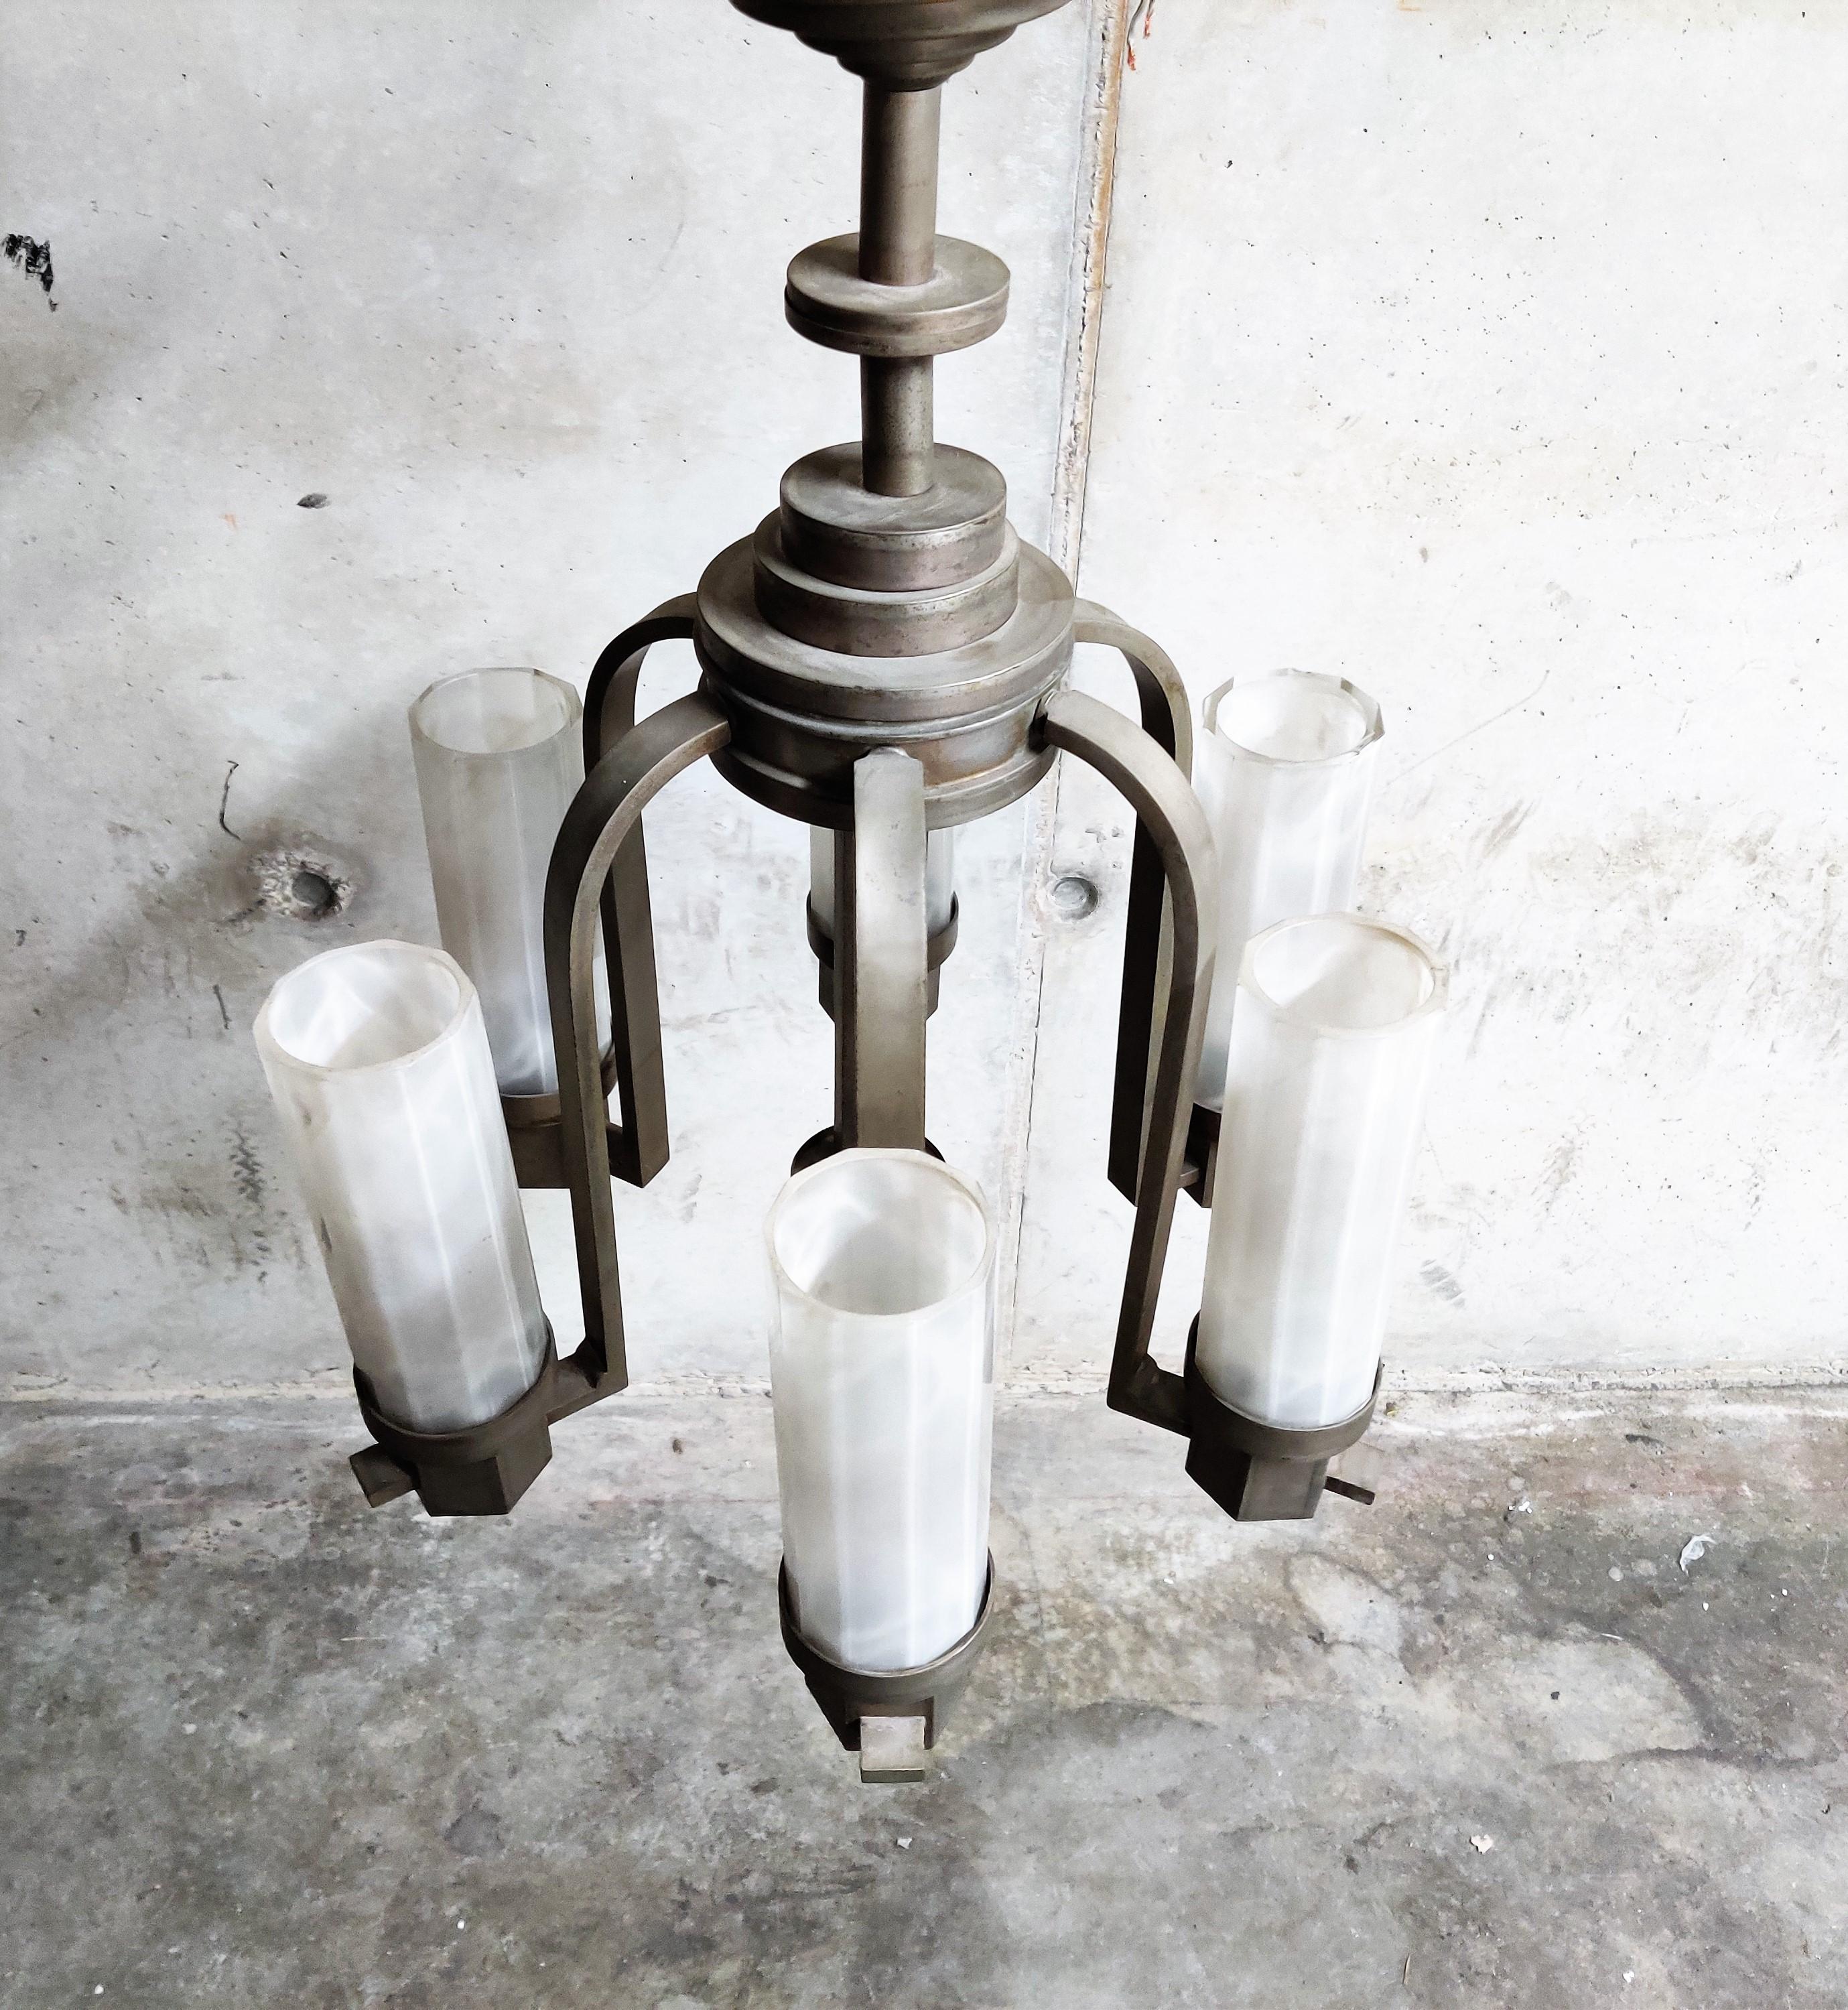 Original Art Deco era chandelier with 6 frosted glass lamp shades.

This beautiful chandelier features a typical Art Deco design with just the right patina.

The chandelier will be professionally rewired.

The glass shades are all original and